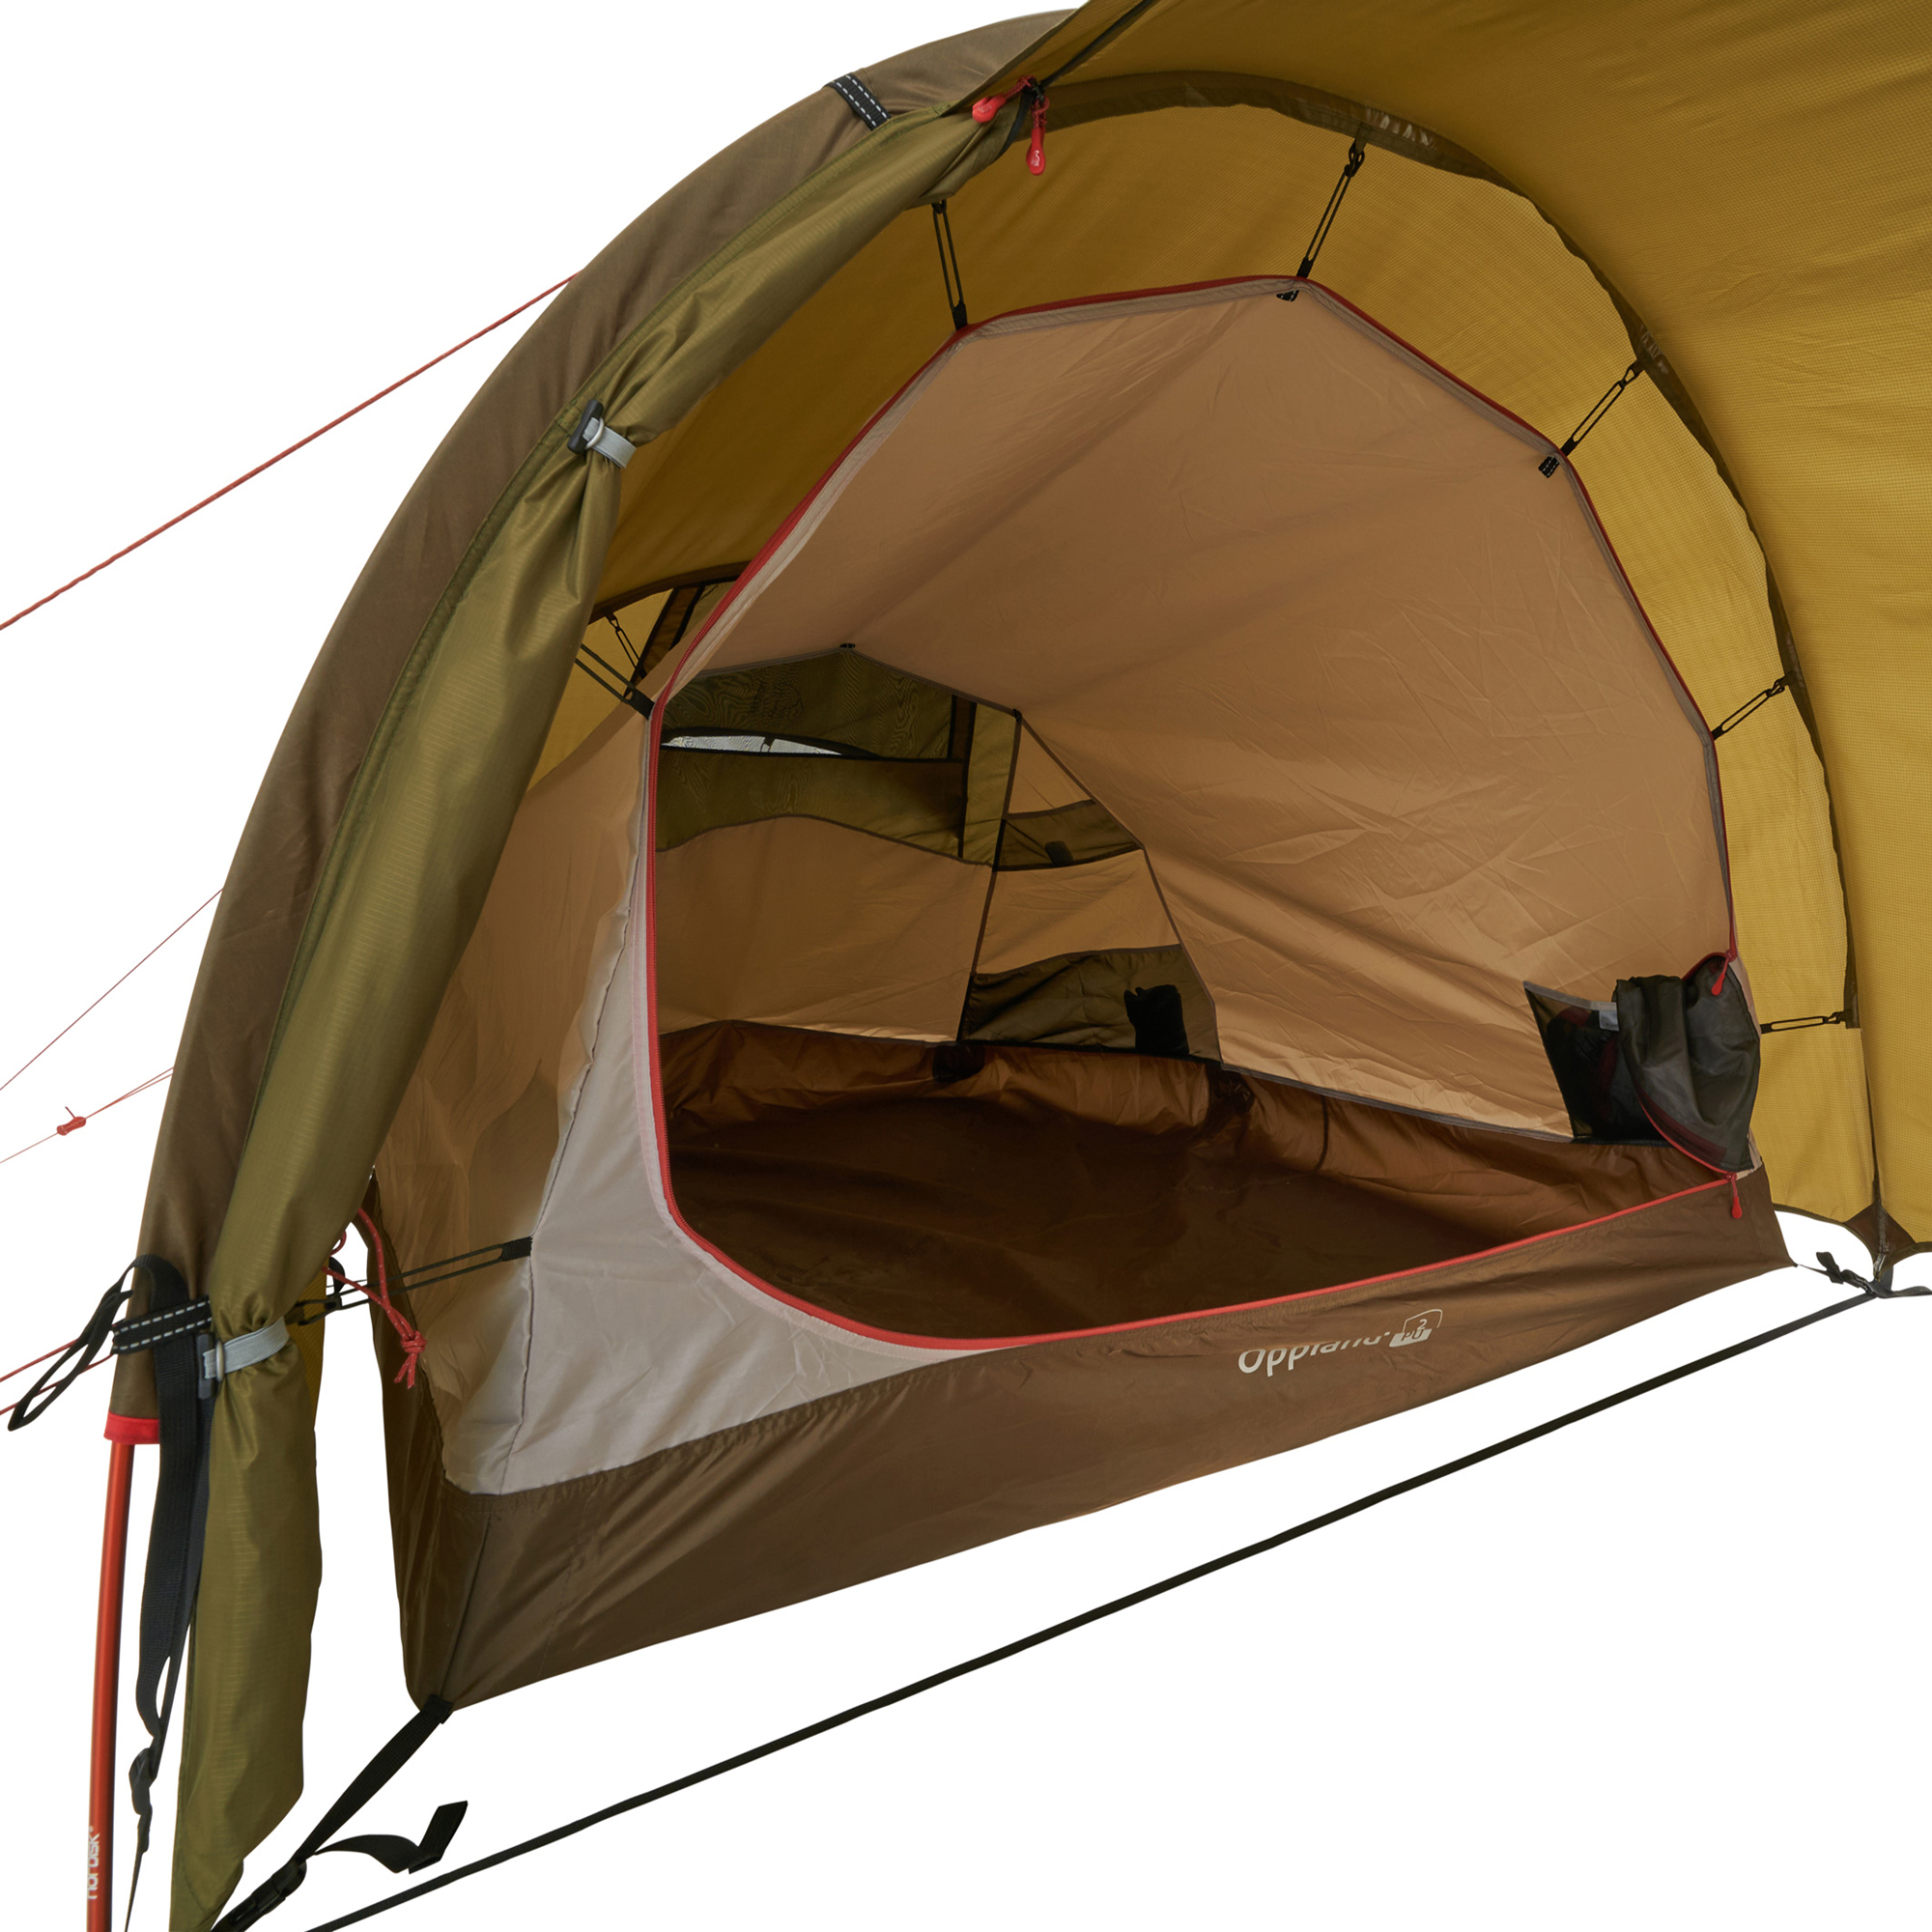 Nordisk Oppland 2 2.0 PU Backpacking Tent